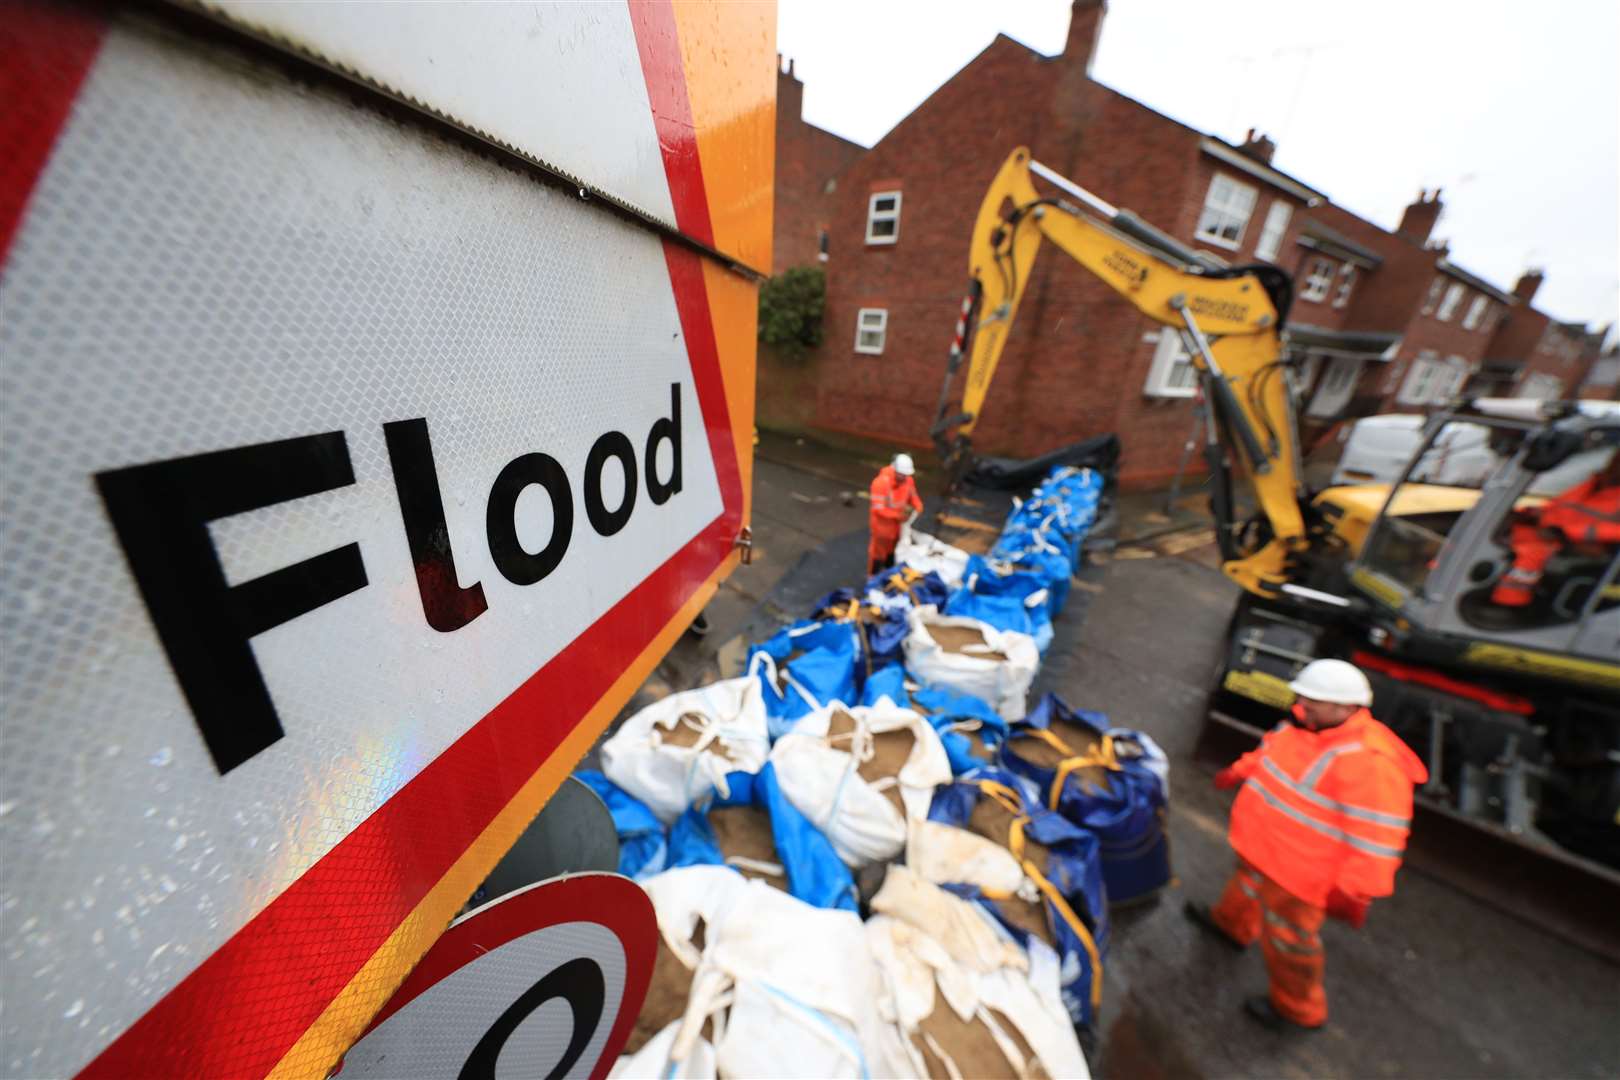 Workmen prepare flood defences near the River Ouse, York, as Storm Christoph is set to bring widespread flooding, gales and snow to parts of the UK (Danny Lawson/PA)